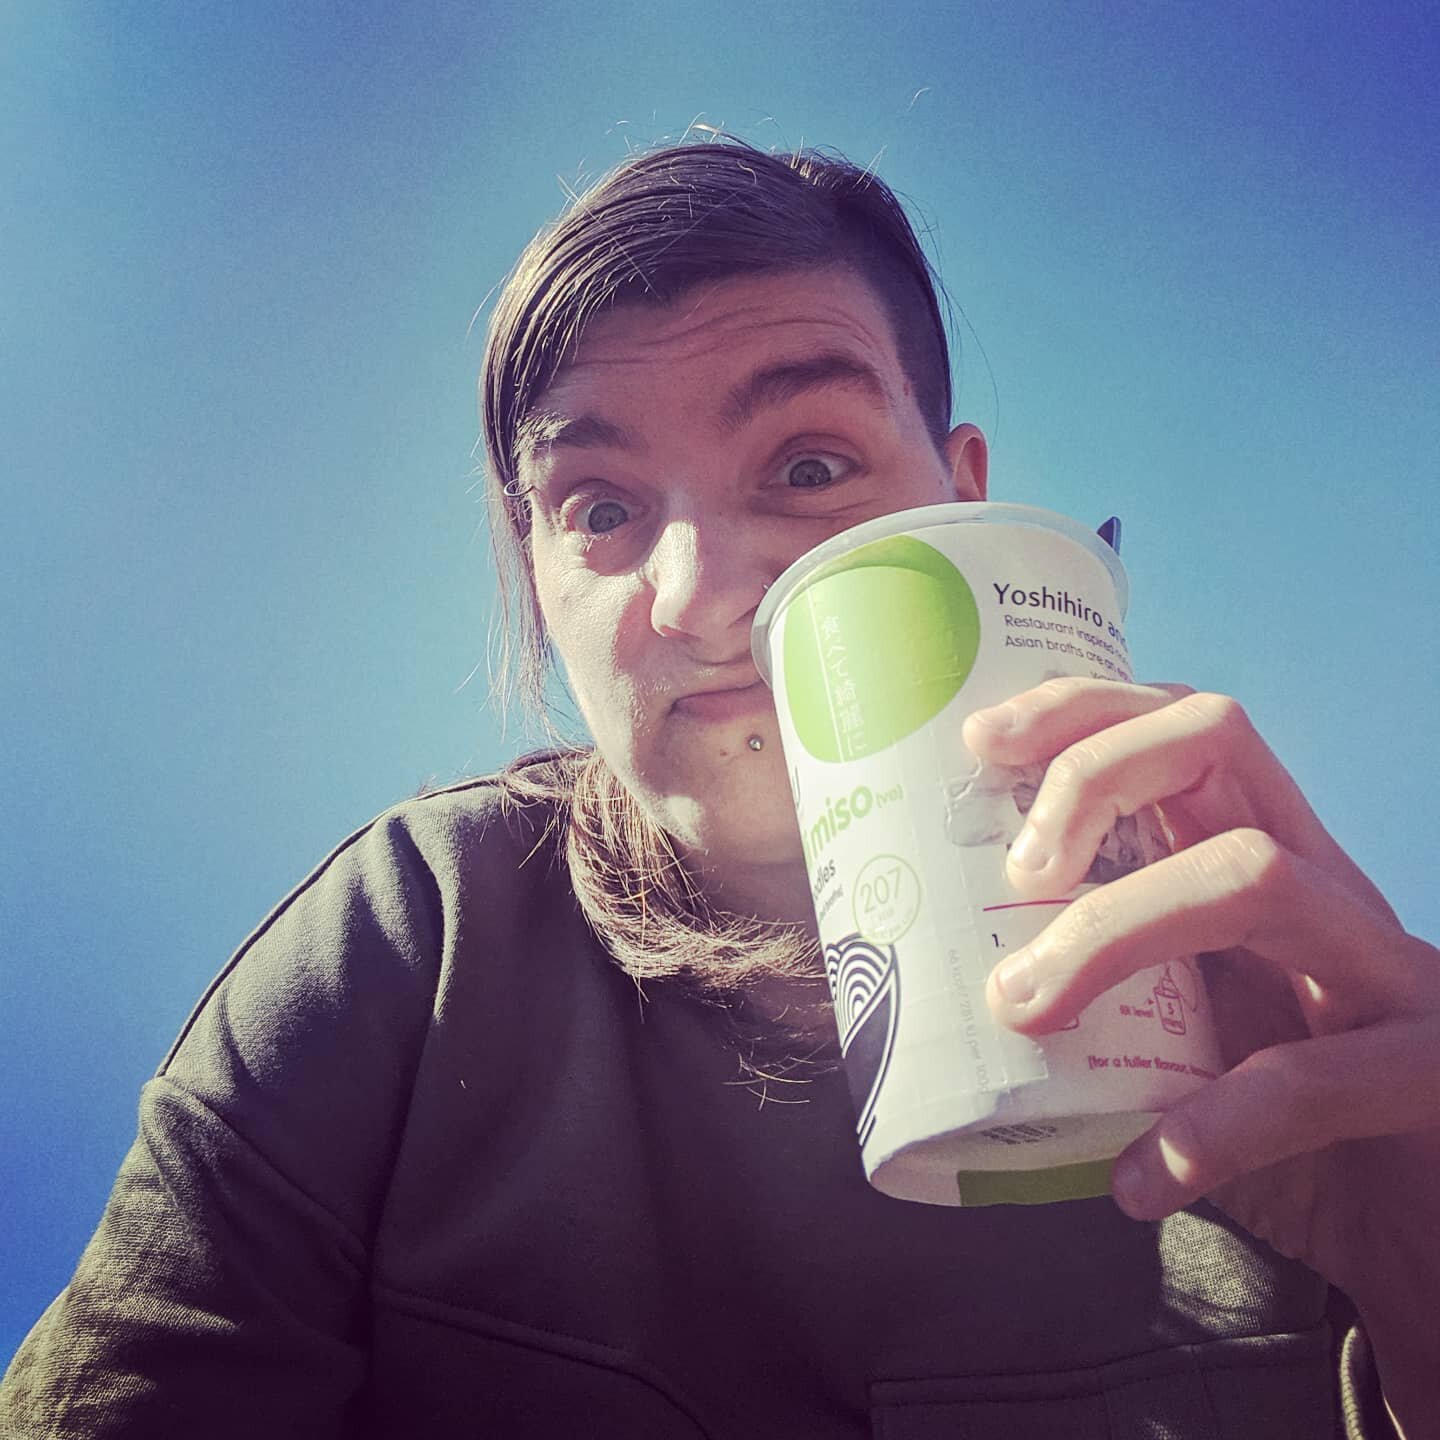 How is everybody holding up? At least the sun is shining and there's noodles! Working on work and working on music over here. 
#musiciansofinstagram #dreampop #isolation #noodles #howareyou #songwriting #songwriter #musician #youtuber